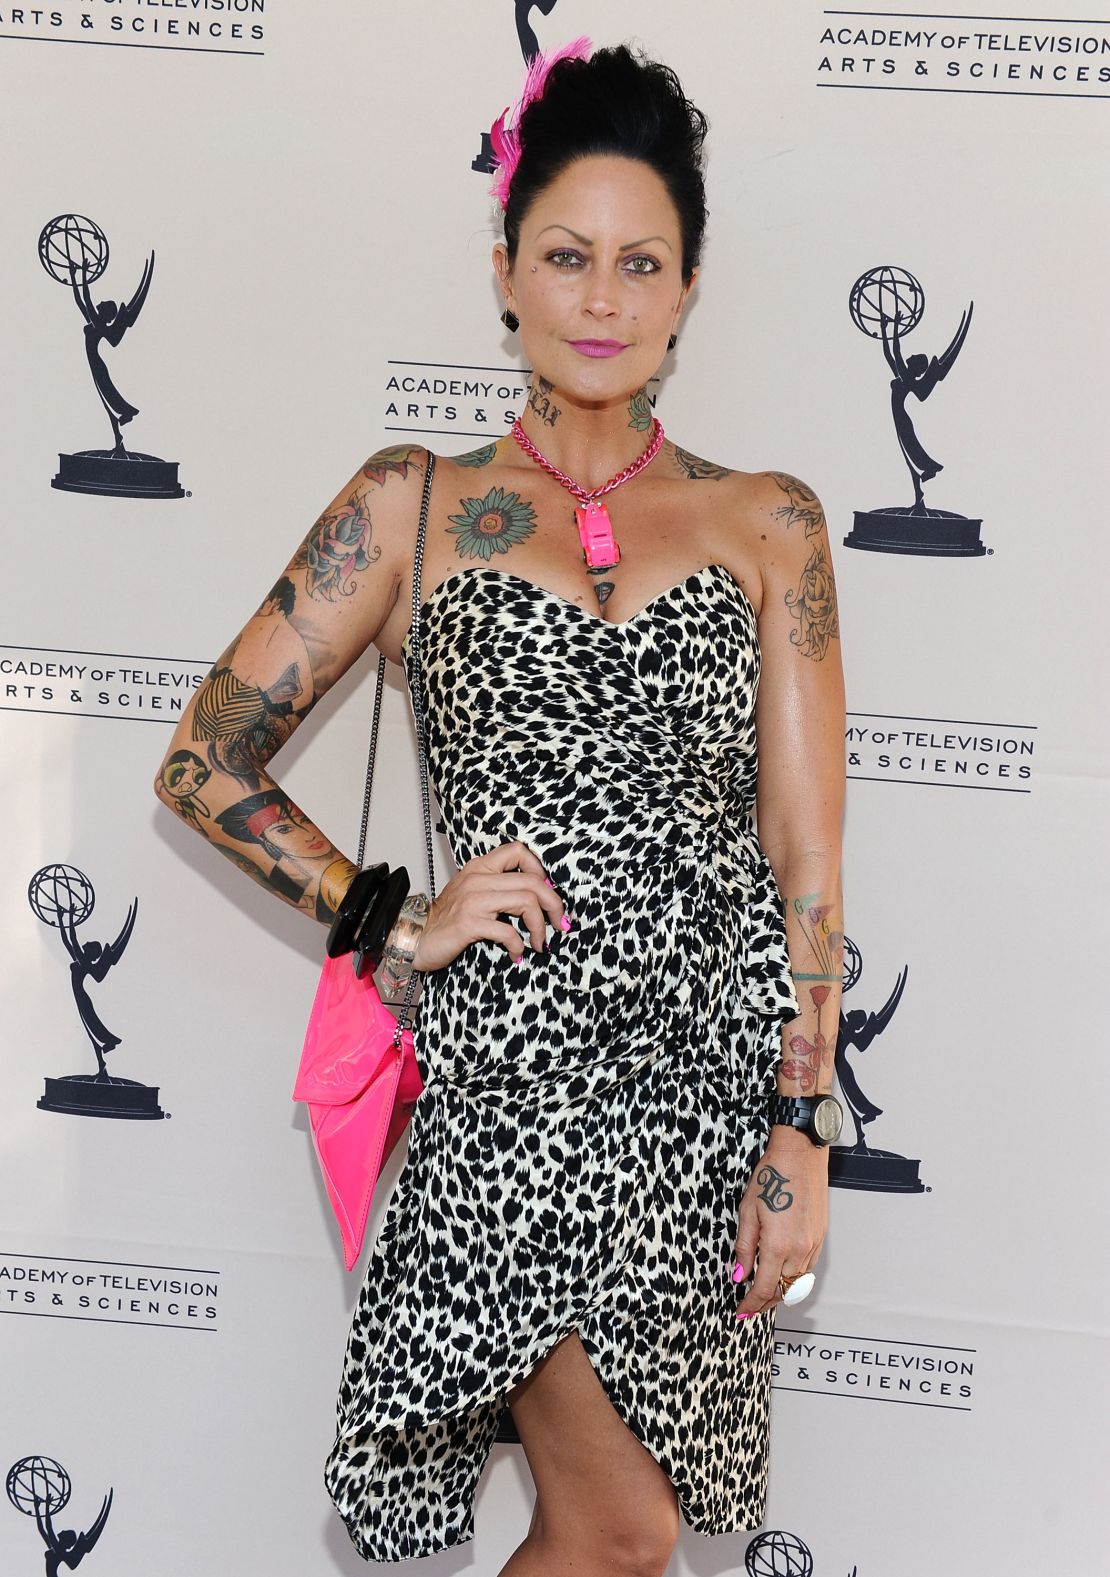 Costume designer Mandi Line attends an Academy of Television Arts & Sciences reception in Los Angeles.